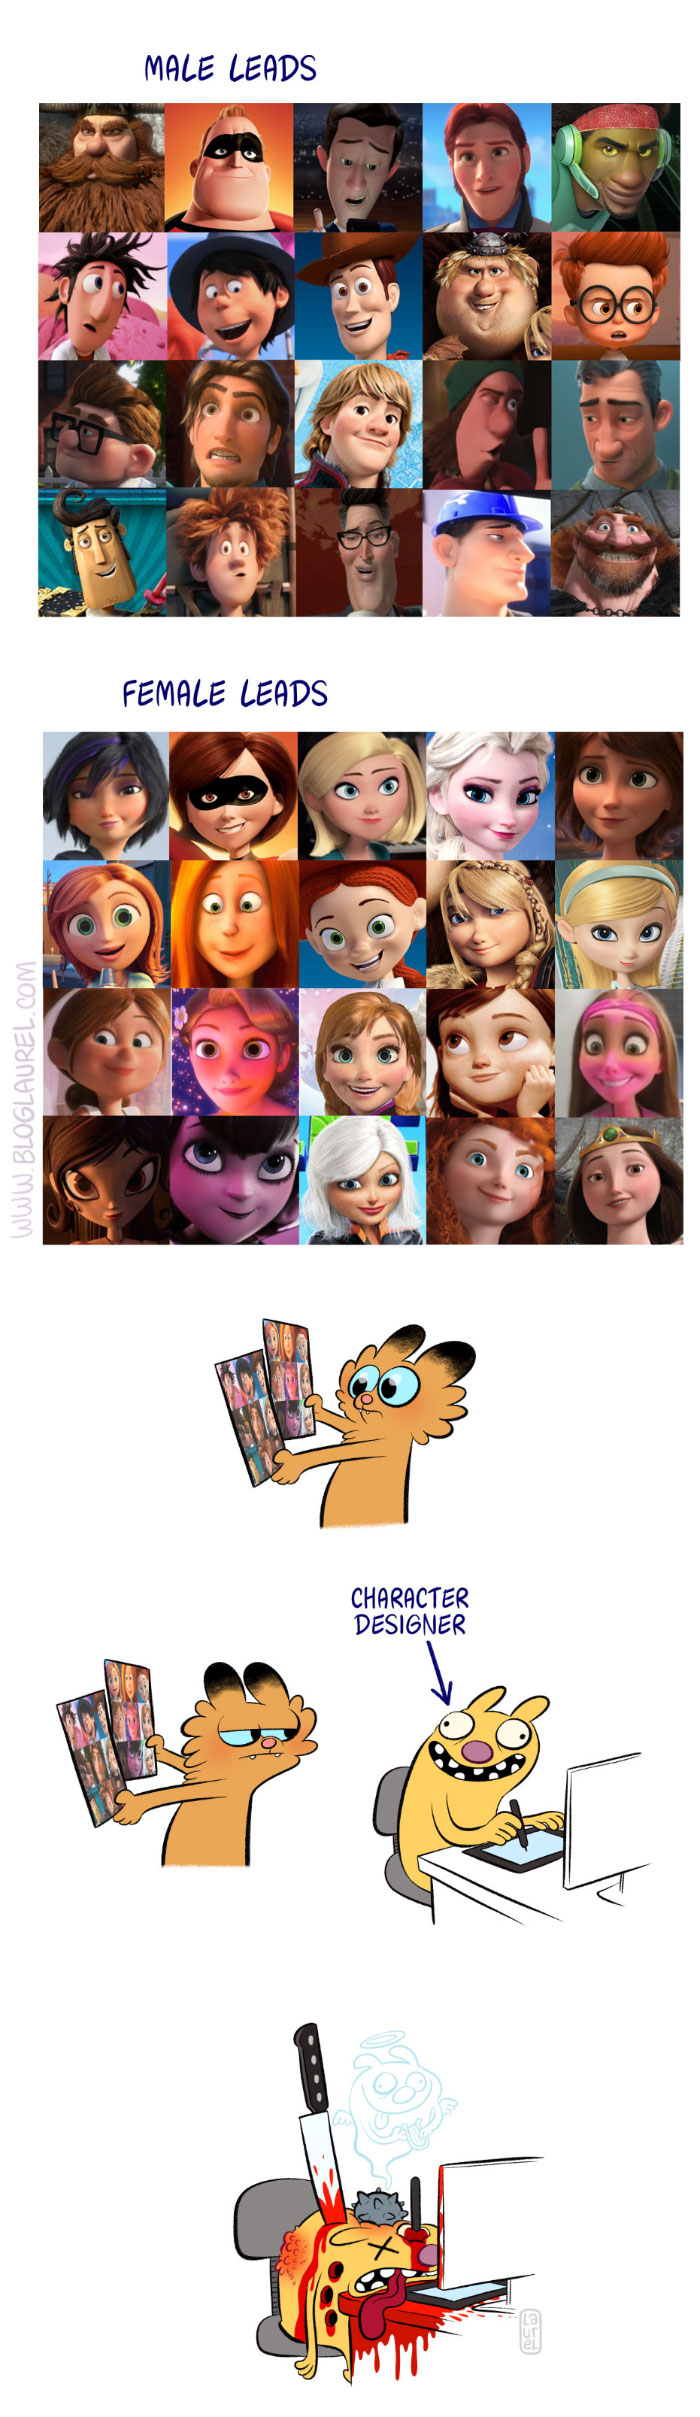 The sexism of Disney, Pixar and others (Dreamworks), with the female and male characters in movies. 